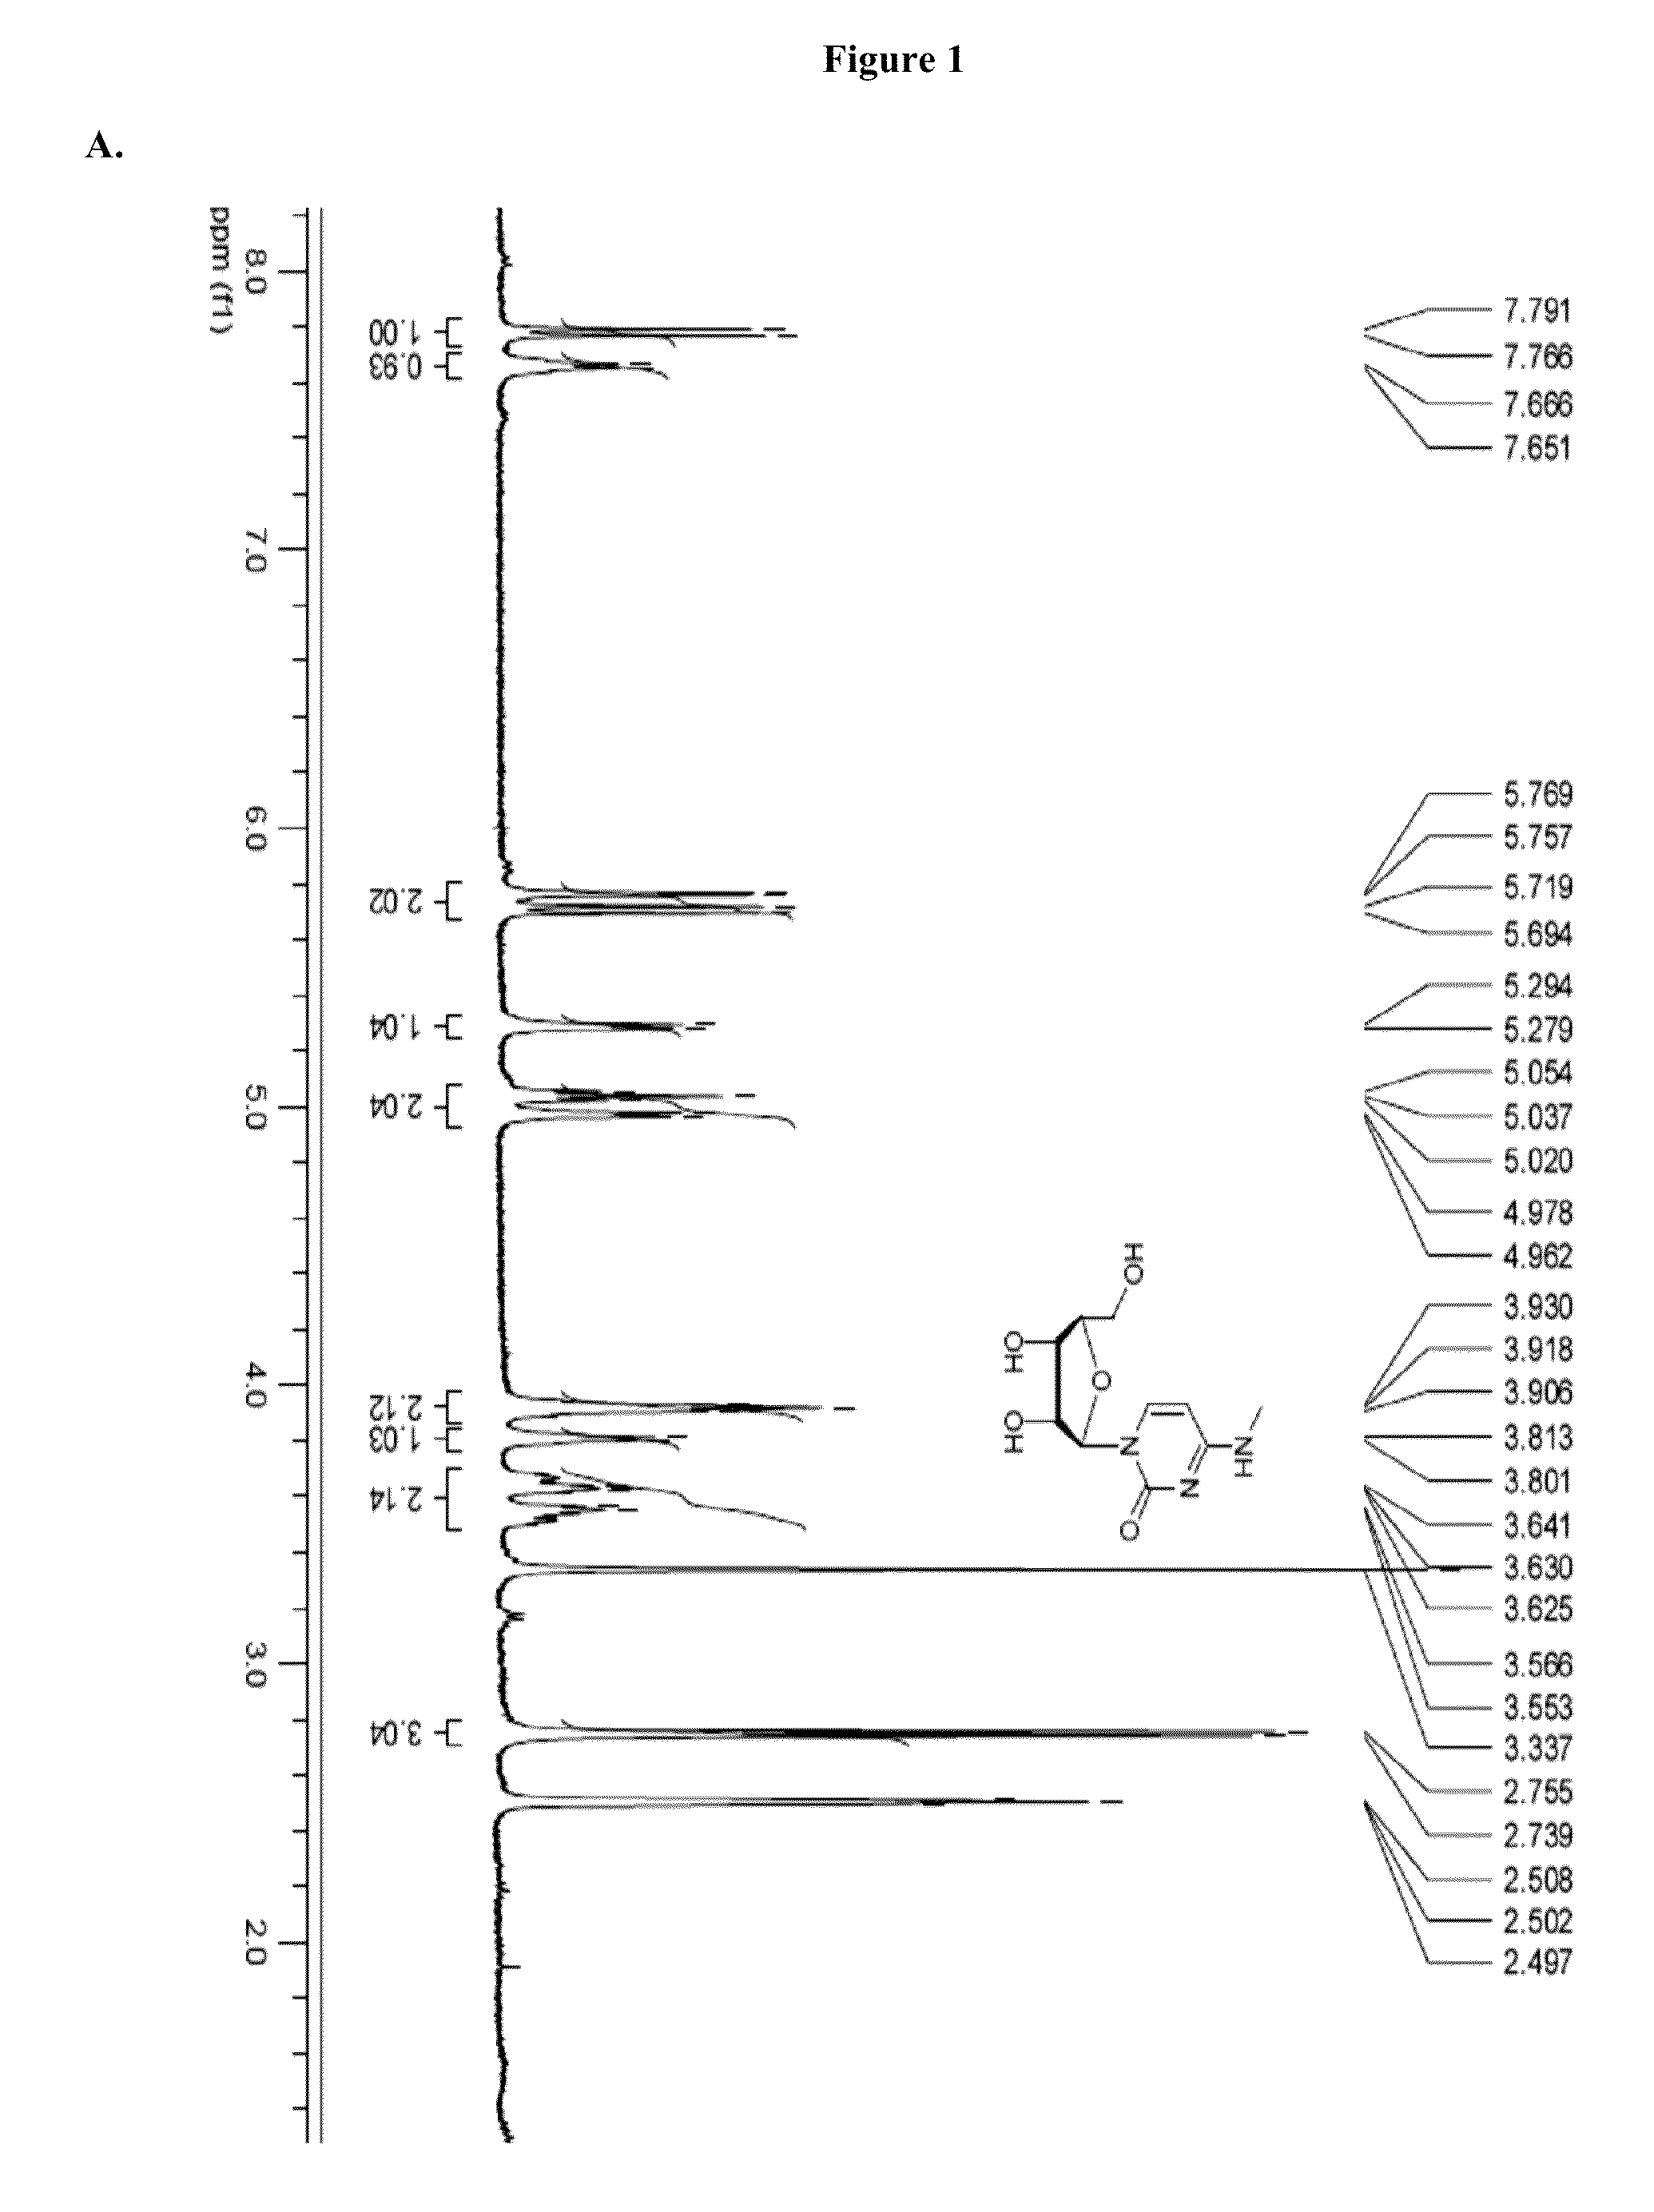 Modified nucleosides, nucleotides, and nucleic acids, and uses thereof